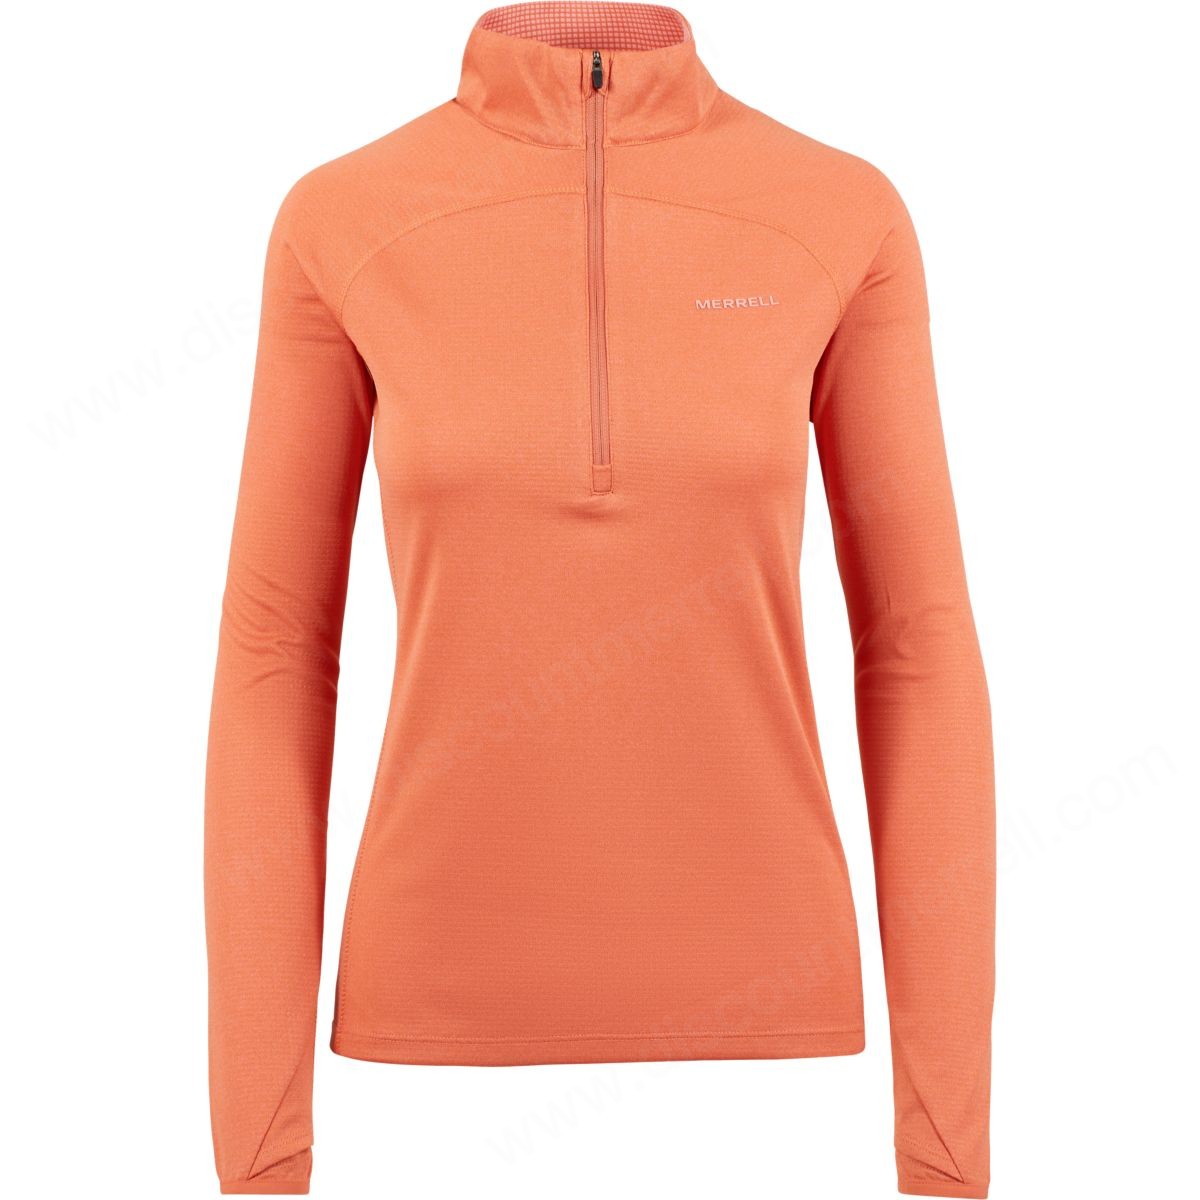 Merrell Lady's Lightweight Long Sleeve / Zip Mid-Layer With Drirelease® Fabric Apricot Brandy Heather - -0